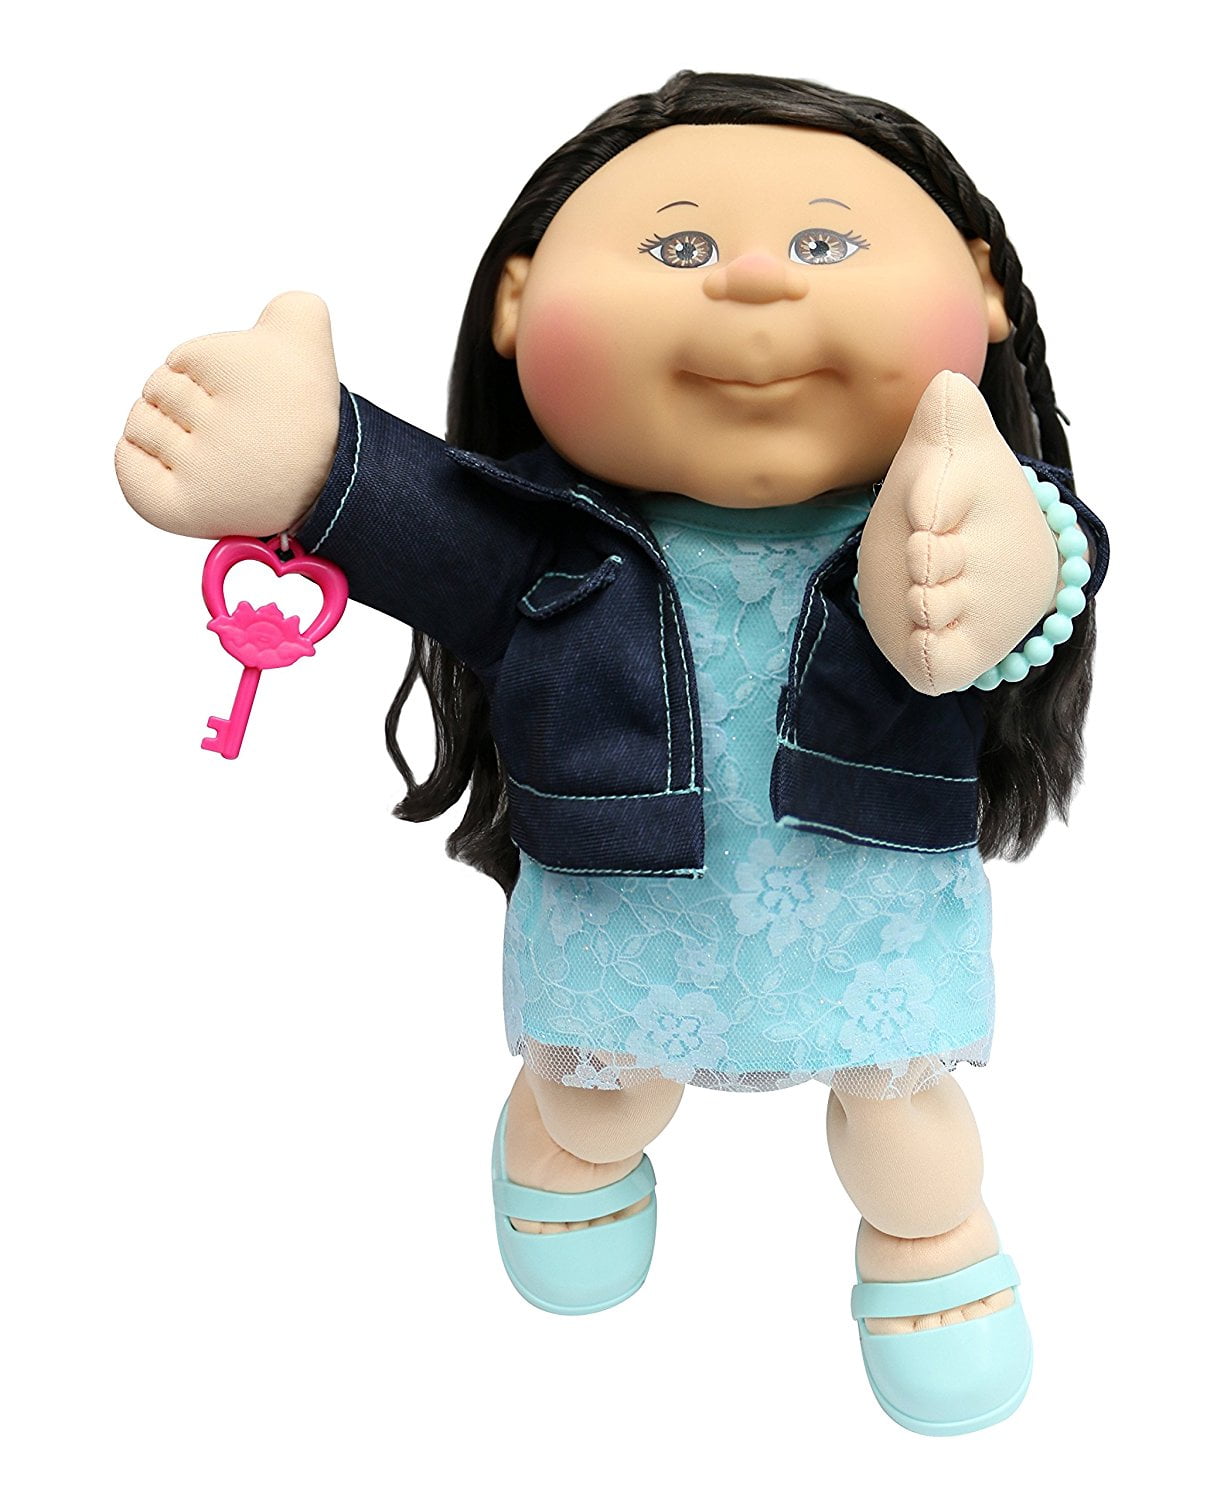 cabbage patch doll with black hair